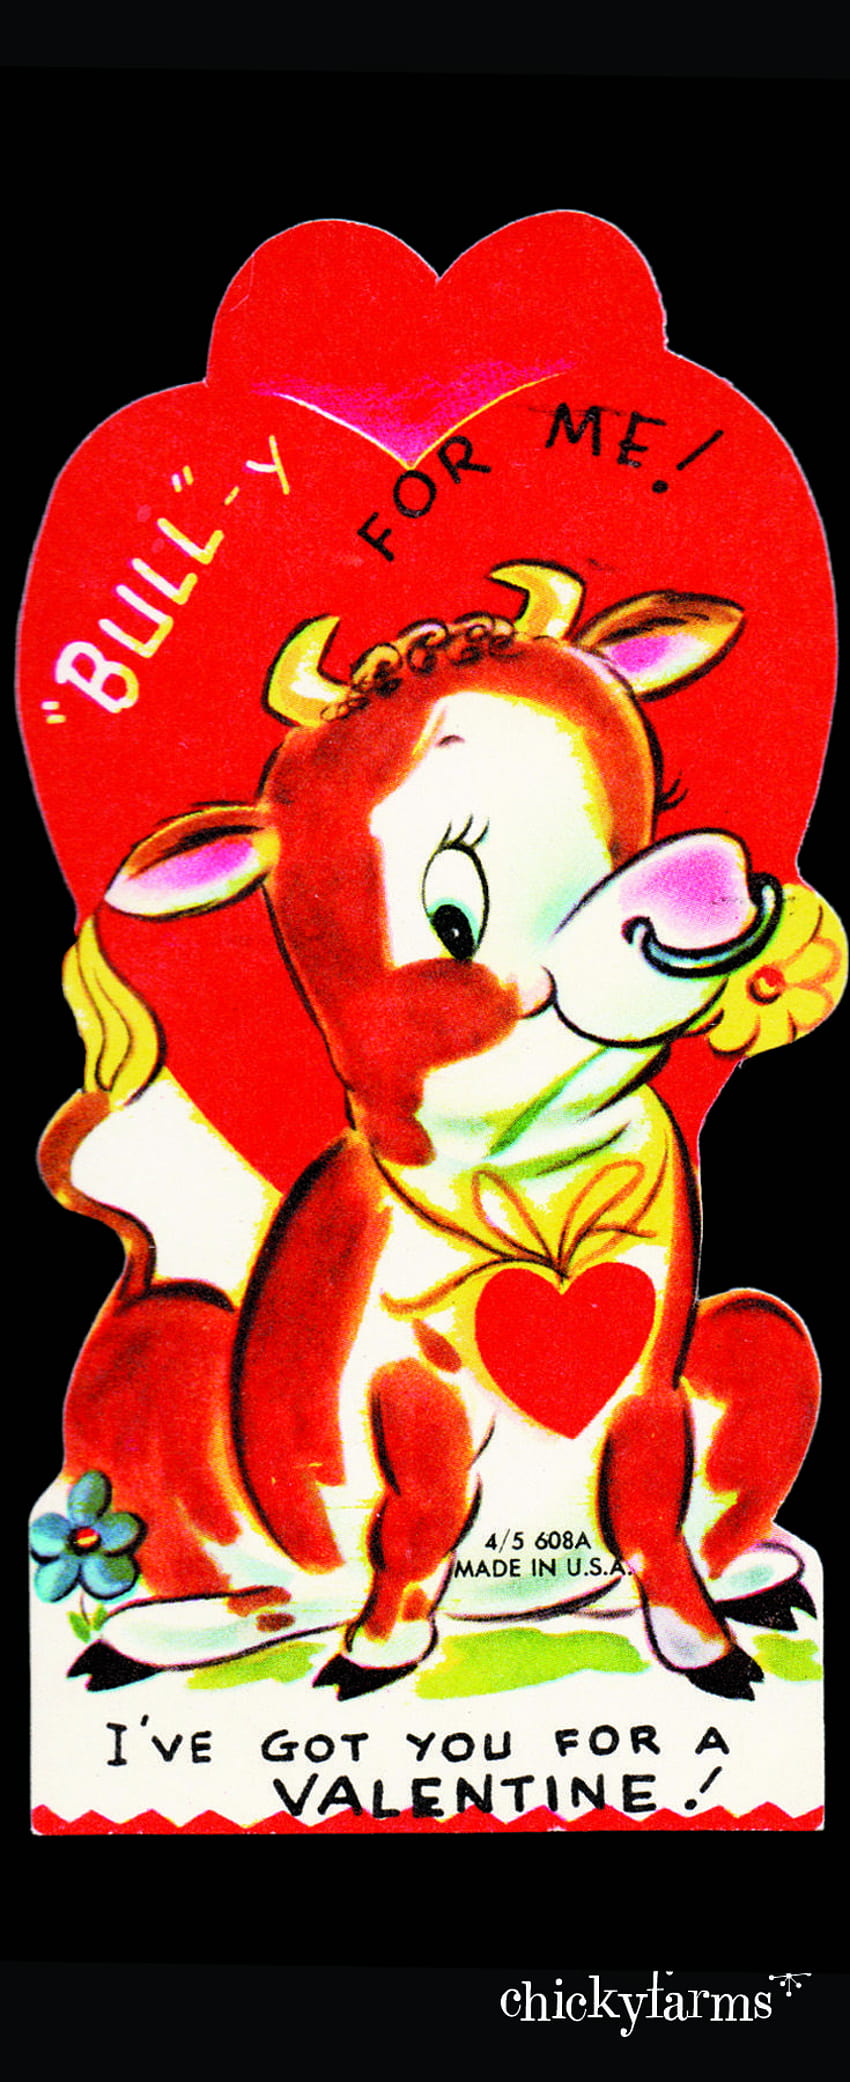 1950s CUTE Big Eyed Cow BULL w Nose Ring VINTAGE VALENTINES DAY CARD Greeting HD phone wallpaper